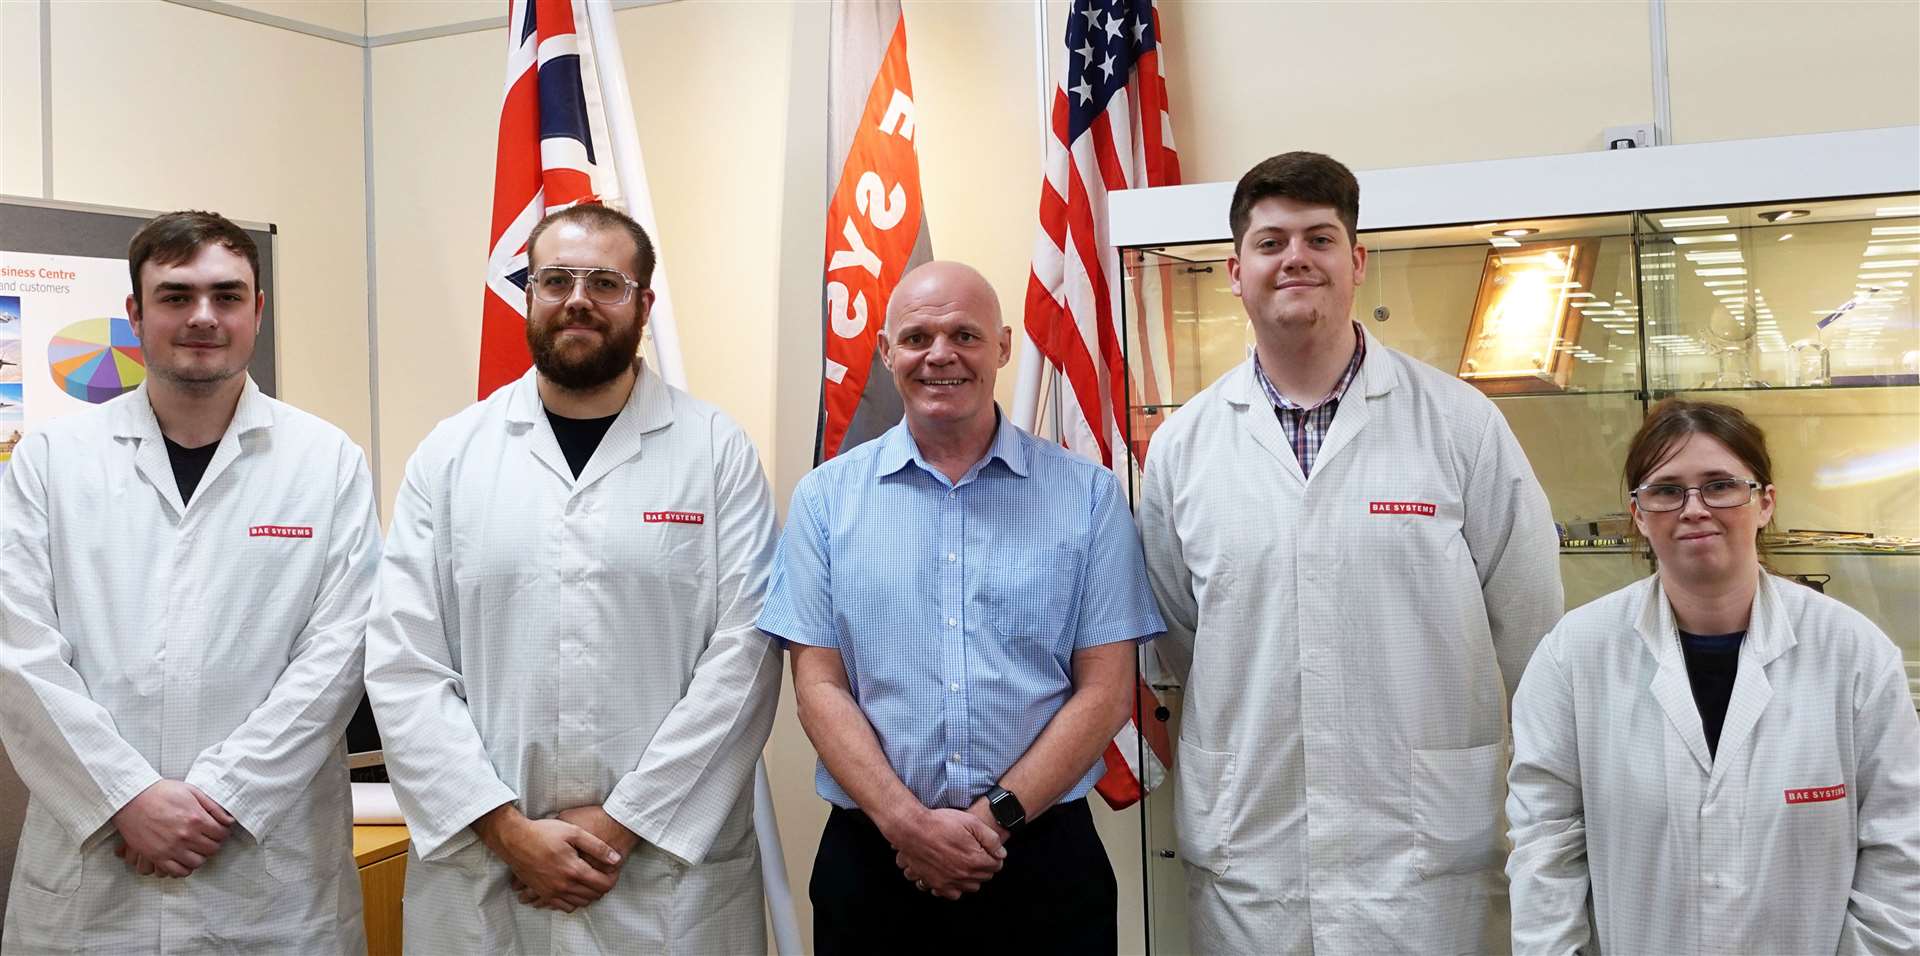 Some of BAE Systems’ skilled Test Technicians and trainees with Mark Applegate, operations manager responsible for the training scheme.